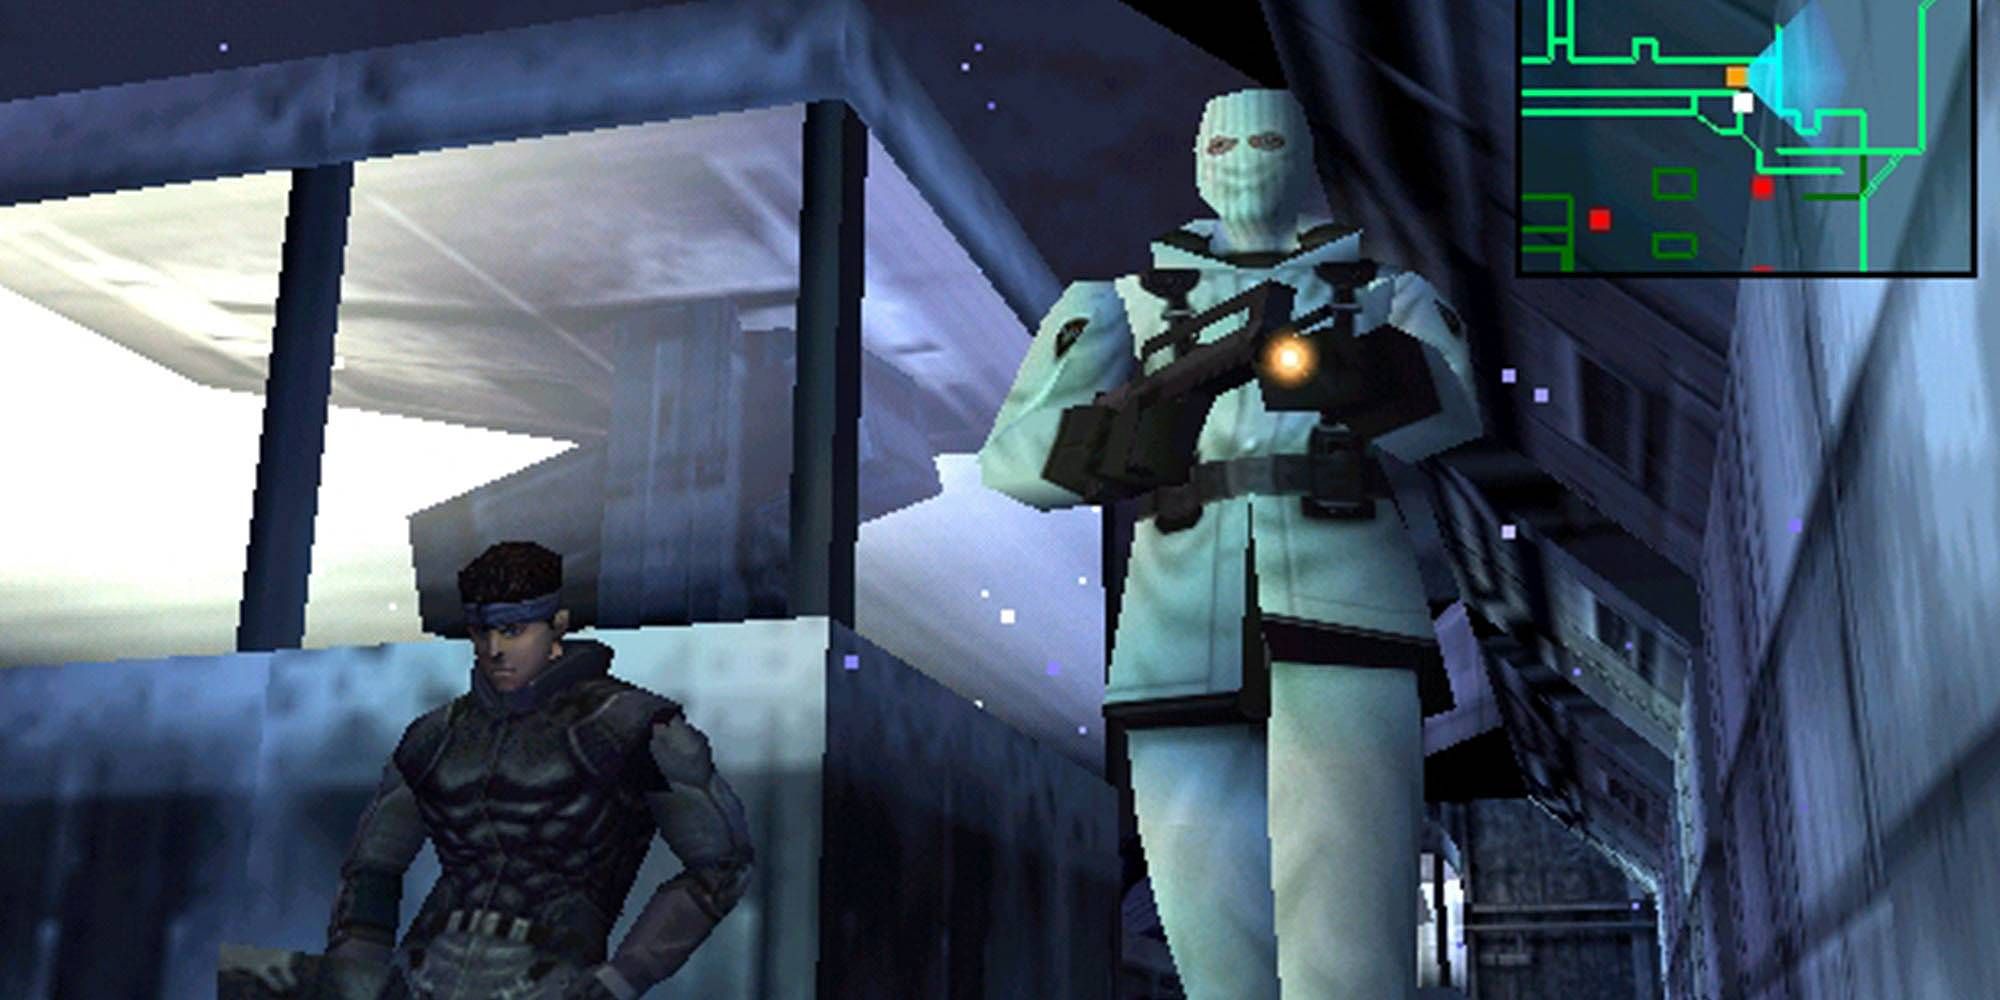 A dark-clad figure crouches as a man with a gun walks by in a snowy environment in Metal Gear Solid 1